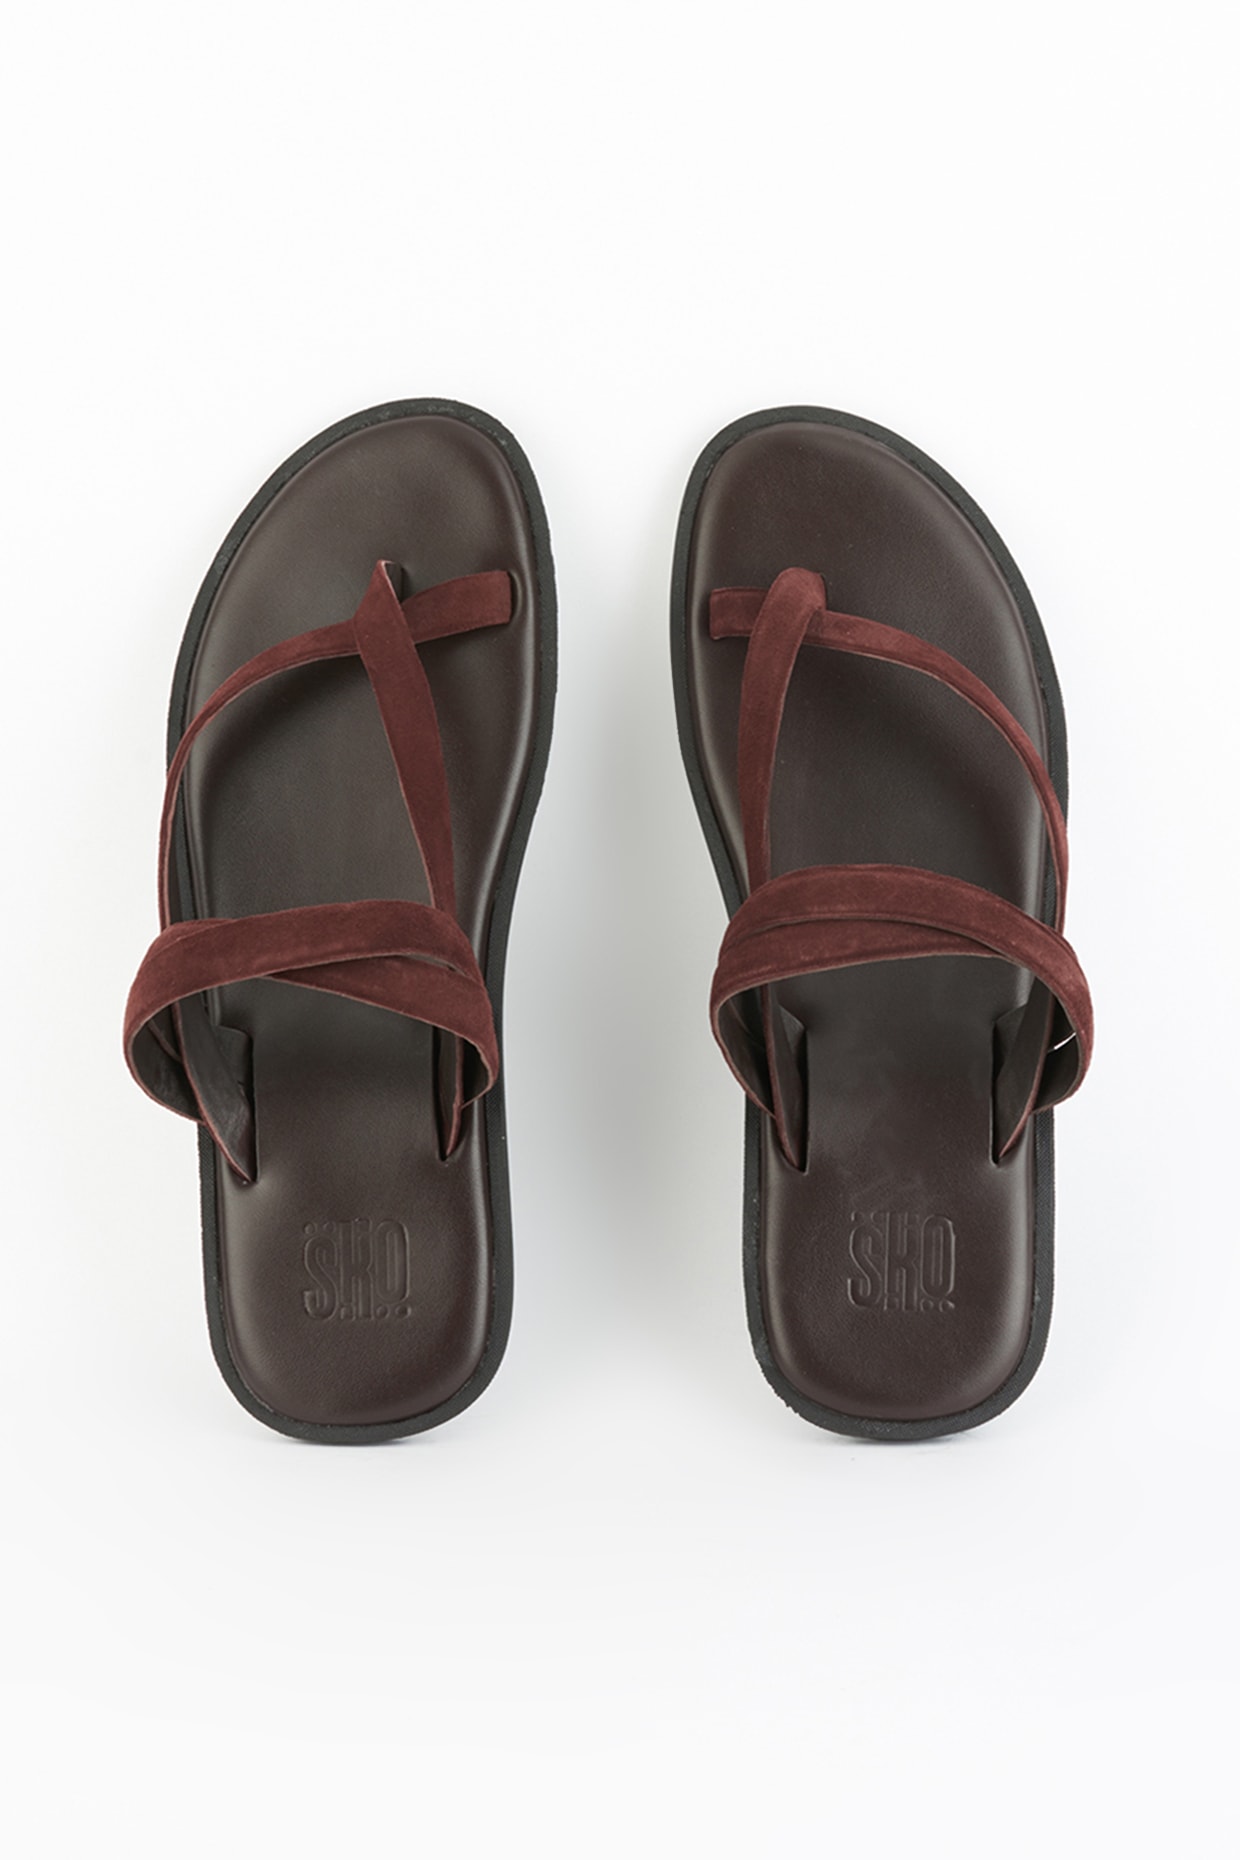 Apollo | Men's | OESH Shoes 3D Printed Sandals | Healthy by Design